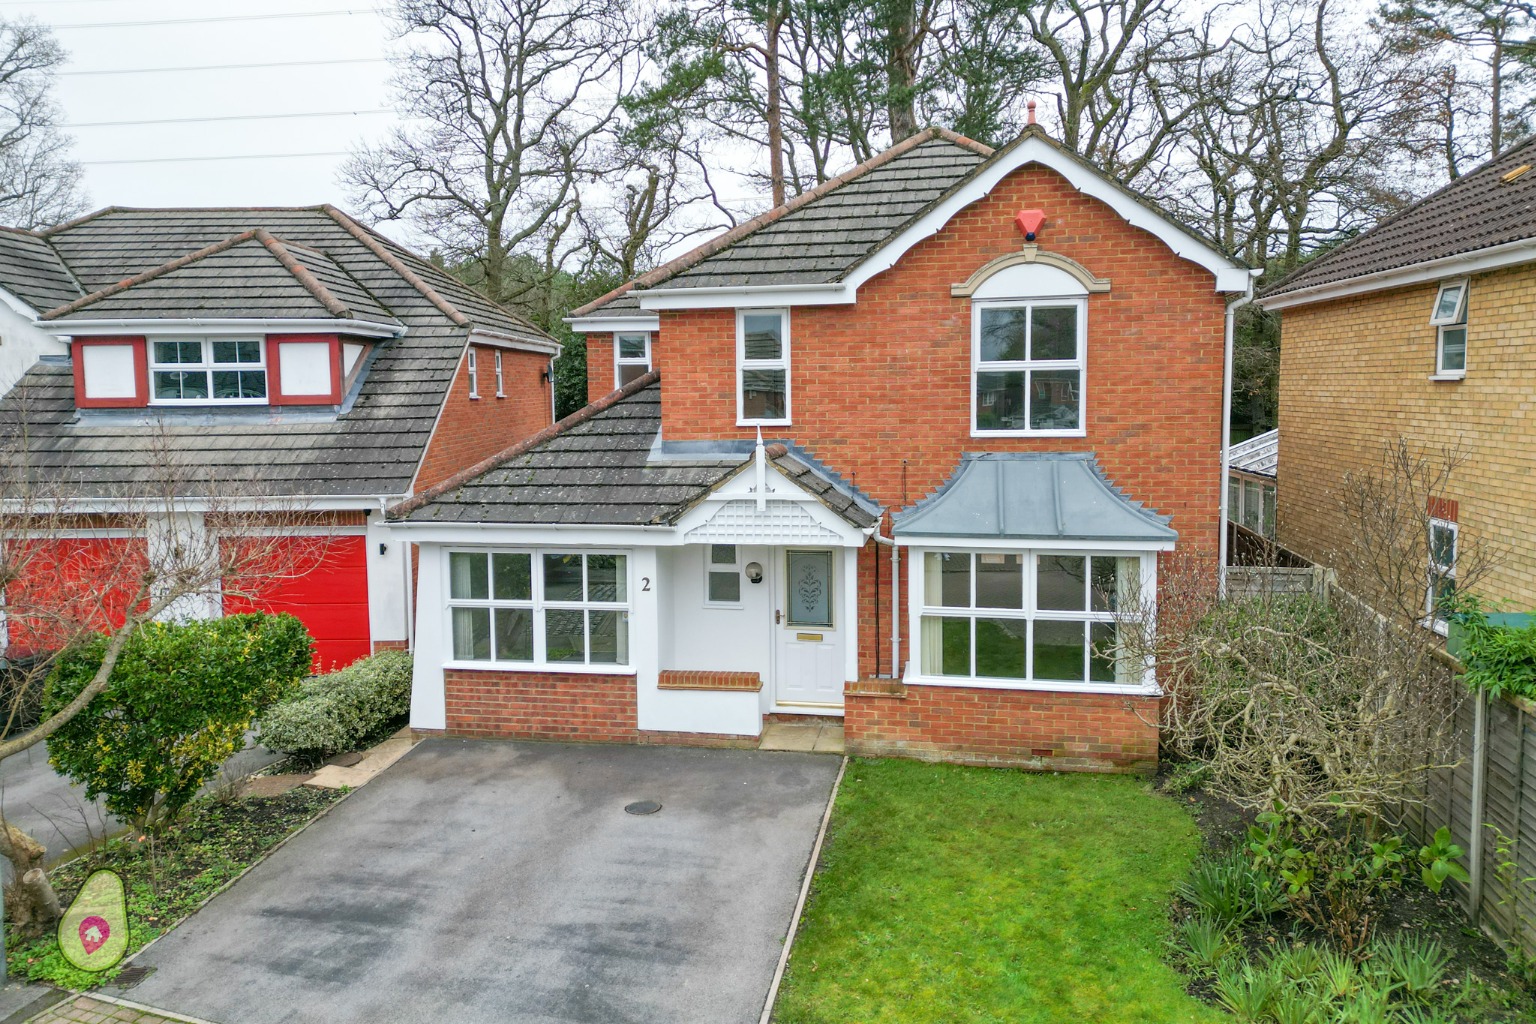 4 bed detached house to rent in Heathside Park, Camberley - Property Image 1